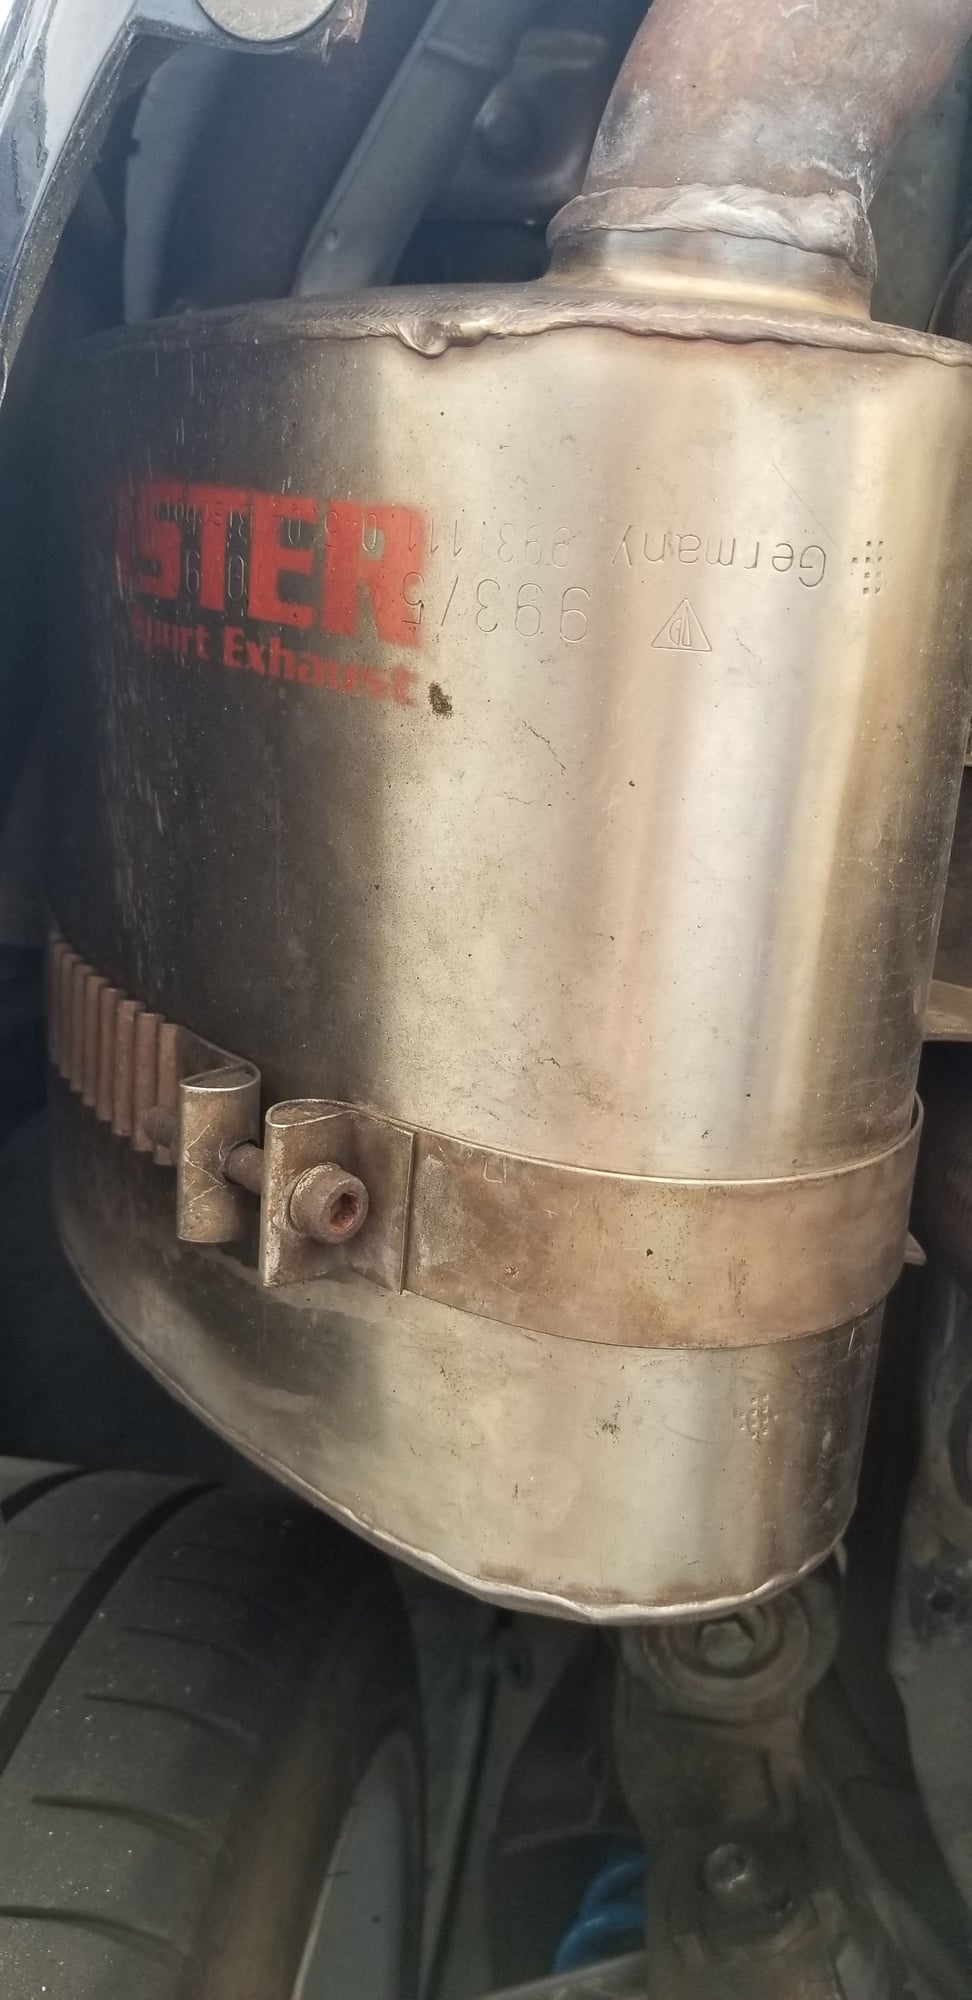 Engine - Exhaust - Want to Trade: My 993 Fister-3 for Stock or LPMM - Used - 1995 to 1998 Porsche 911 - Anaheim, CA 92807, United States